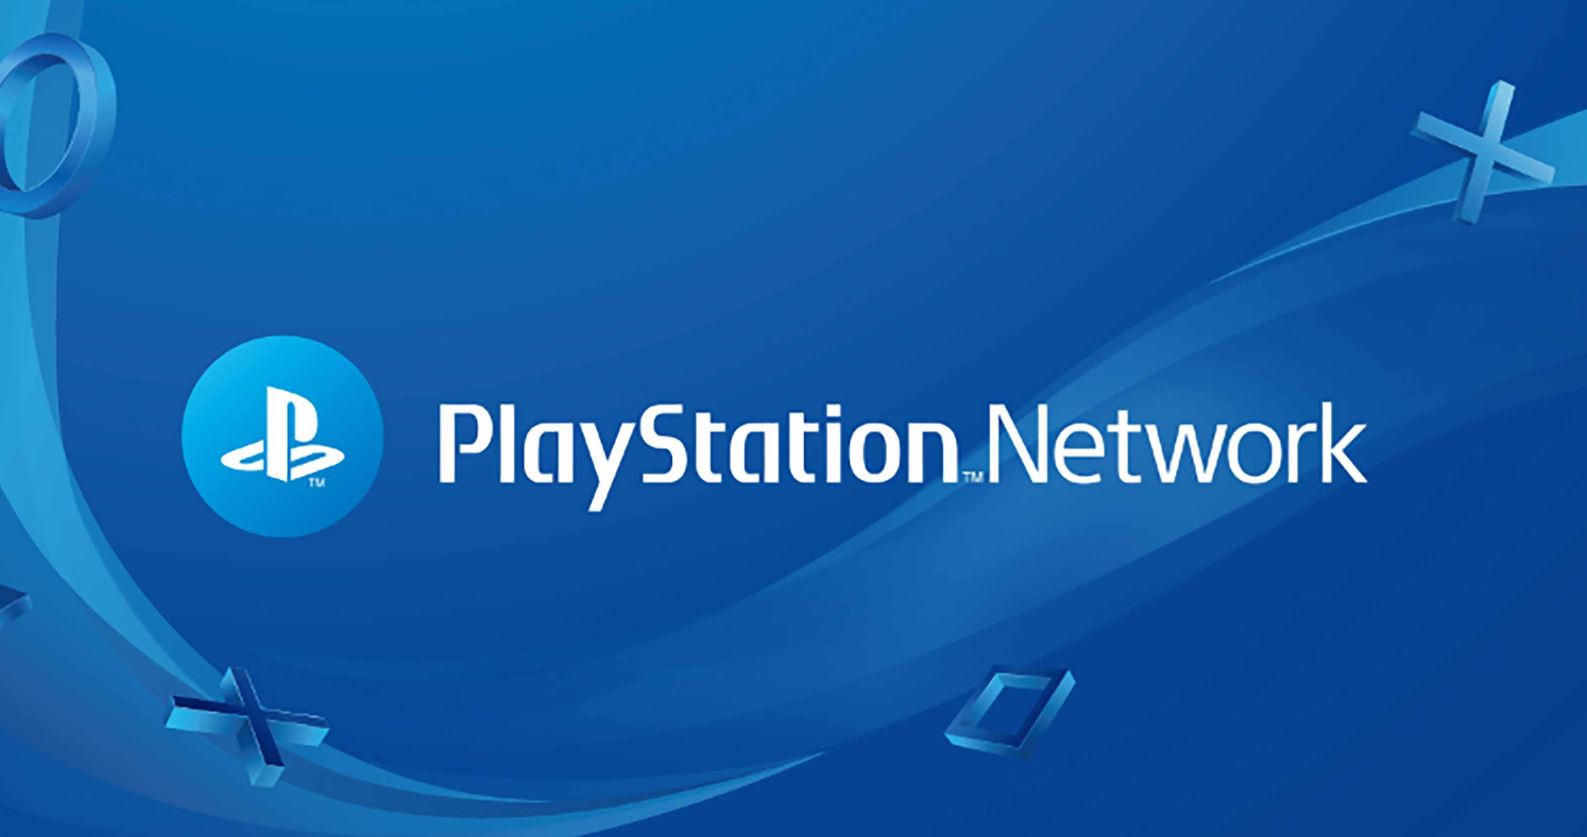 PSN Server Down Status Update: Sony Confirms Network Issues after